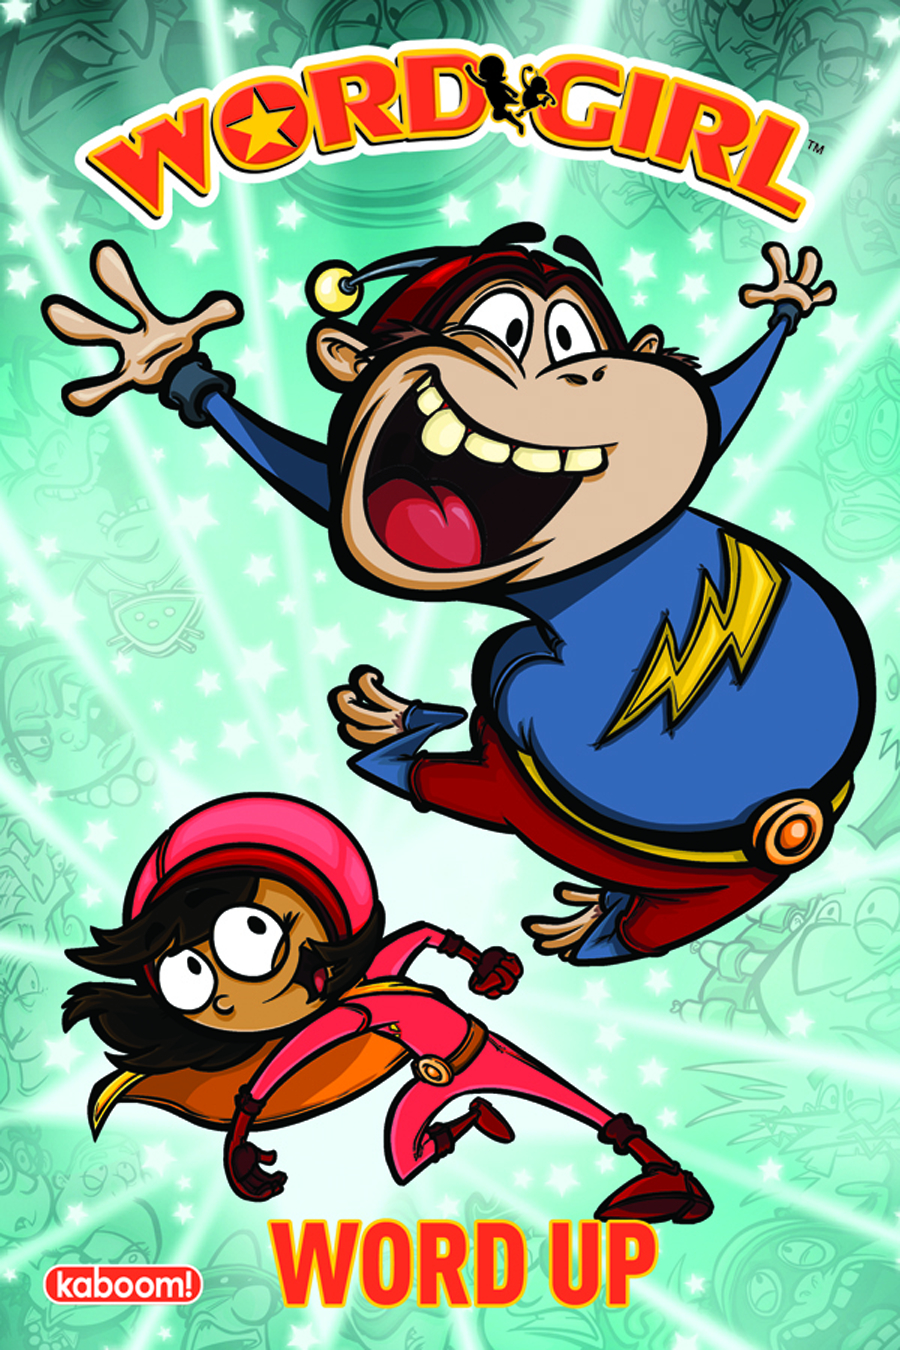 WordGirl and Captain Huggy Face continue to battle the terrifying - and som...